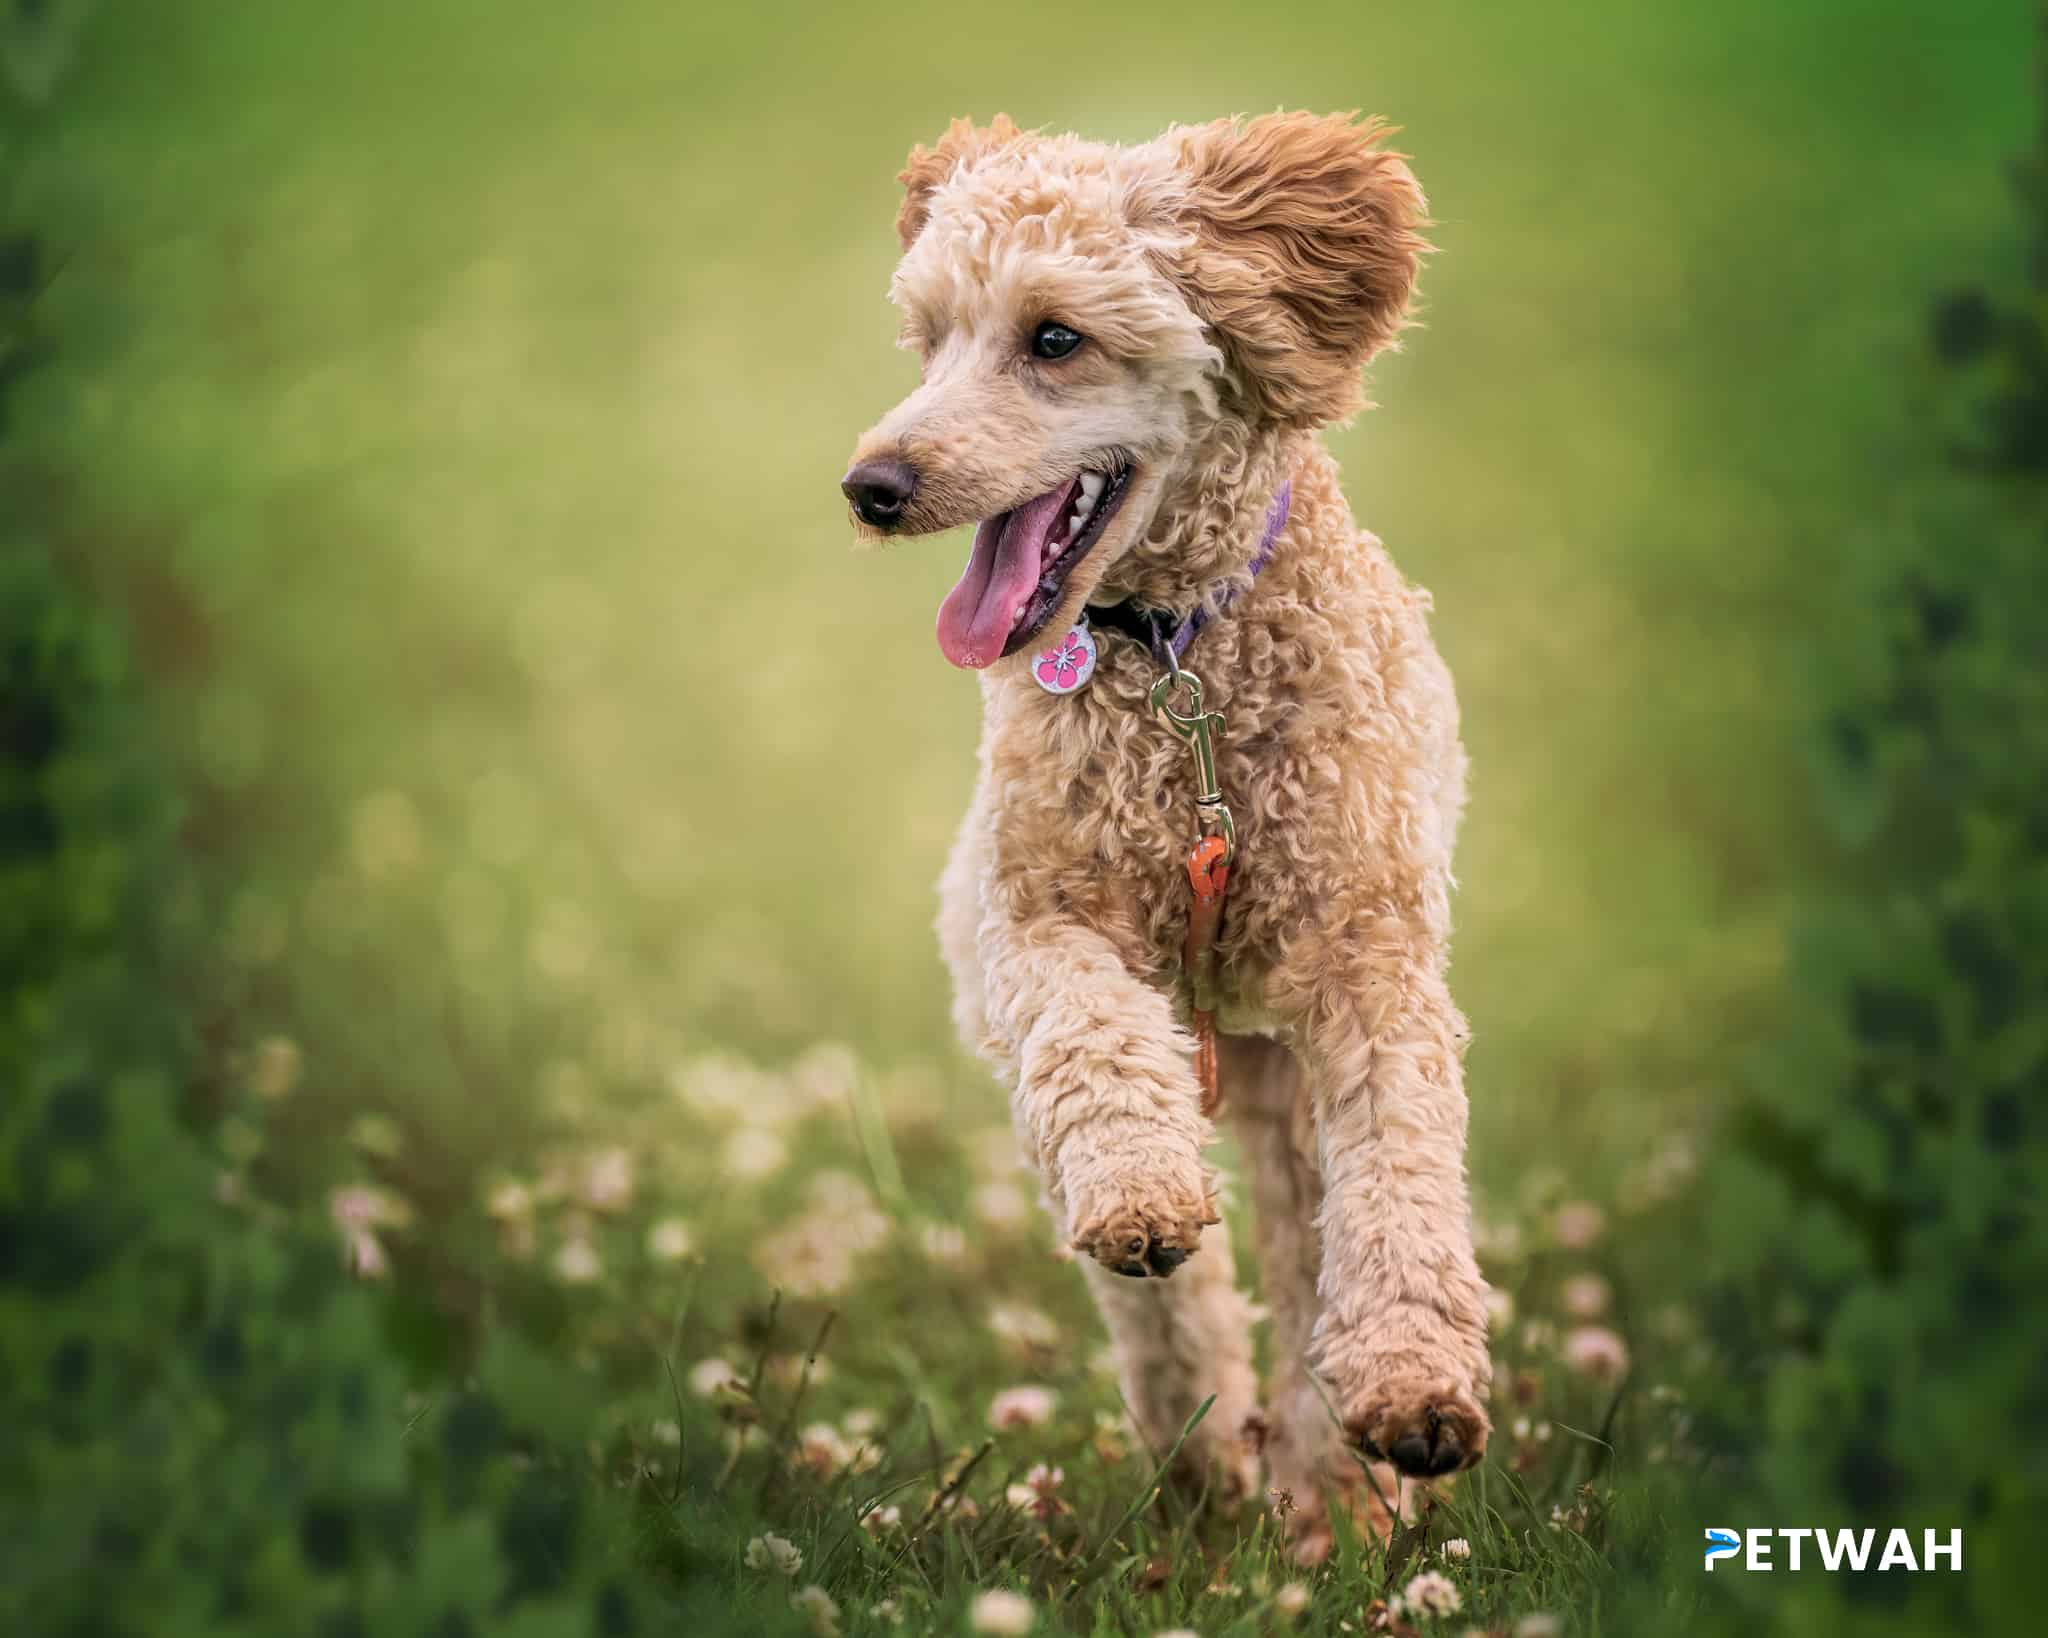 Effective Strategies for Socializing Your Poodle with Dogs and People